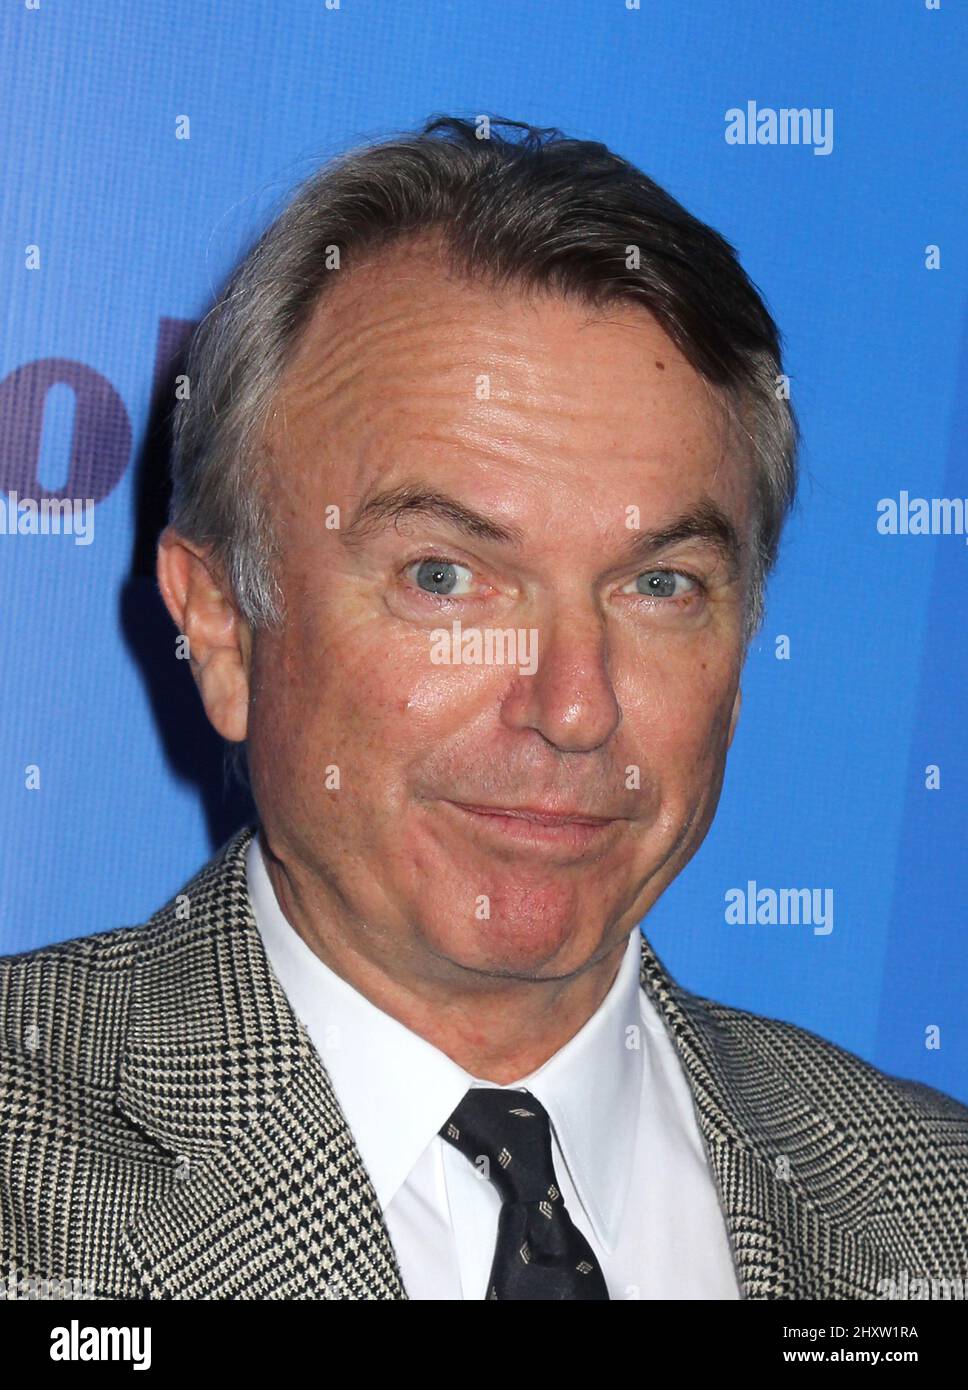 Sam Neill attends the 2011 FOX Programming Presentation Post Party at the Wollman Rink in Central Park on May 16, 2011 in New York City. Stock Photo